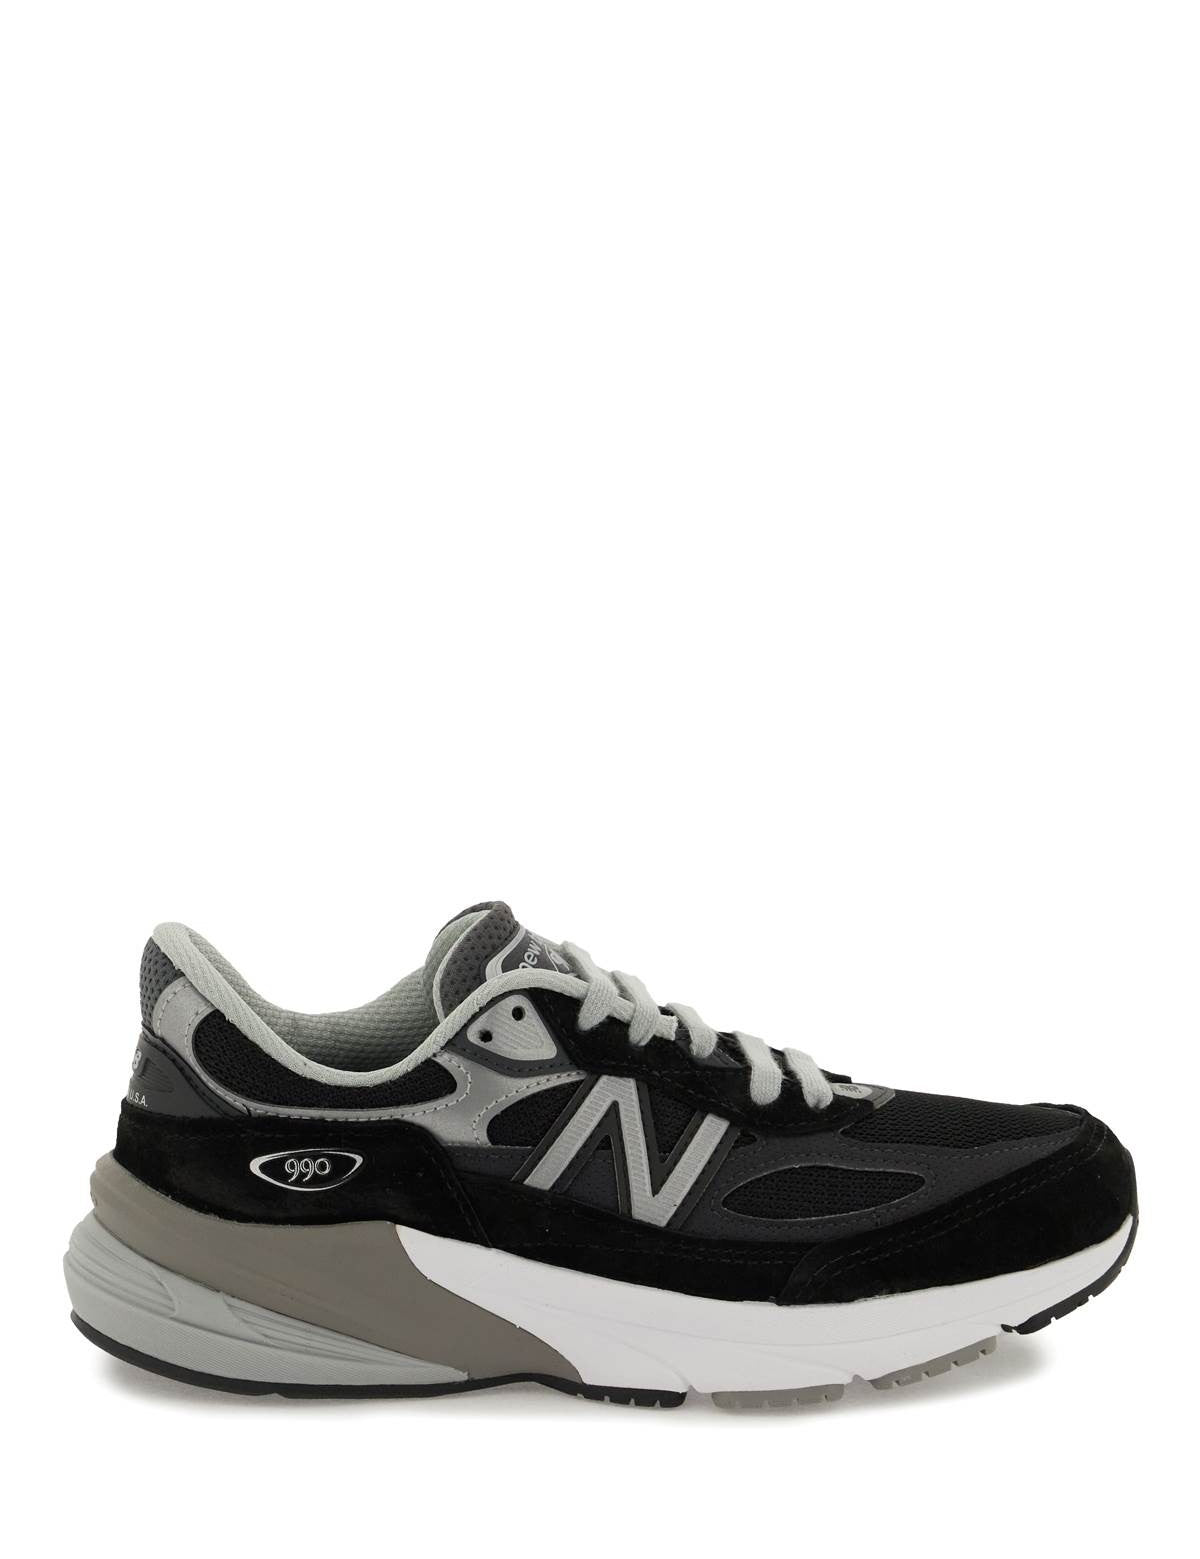 new-balance-made-in-usa-990v6-sneakers.jpg